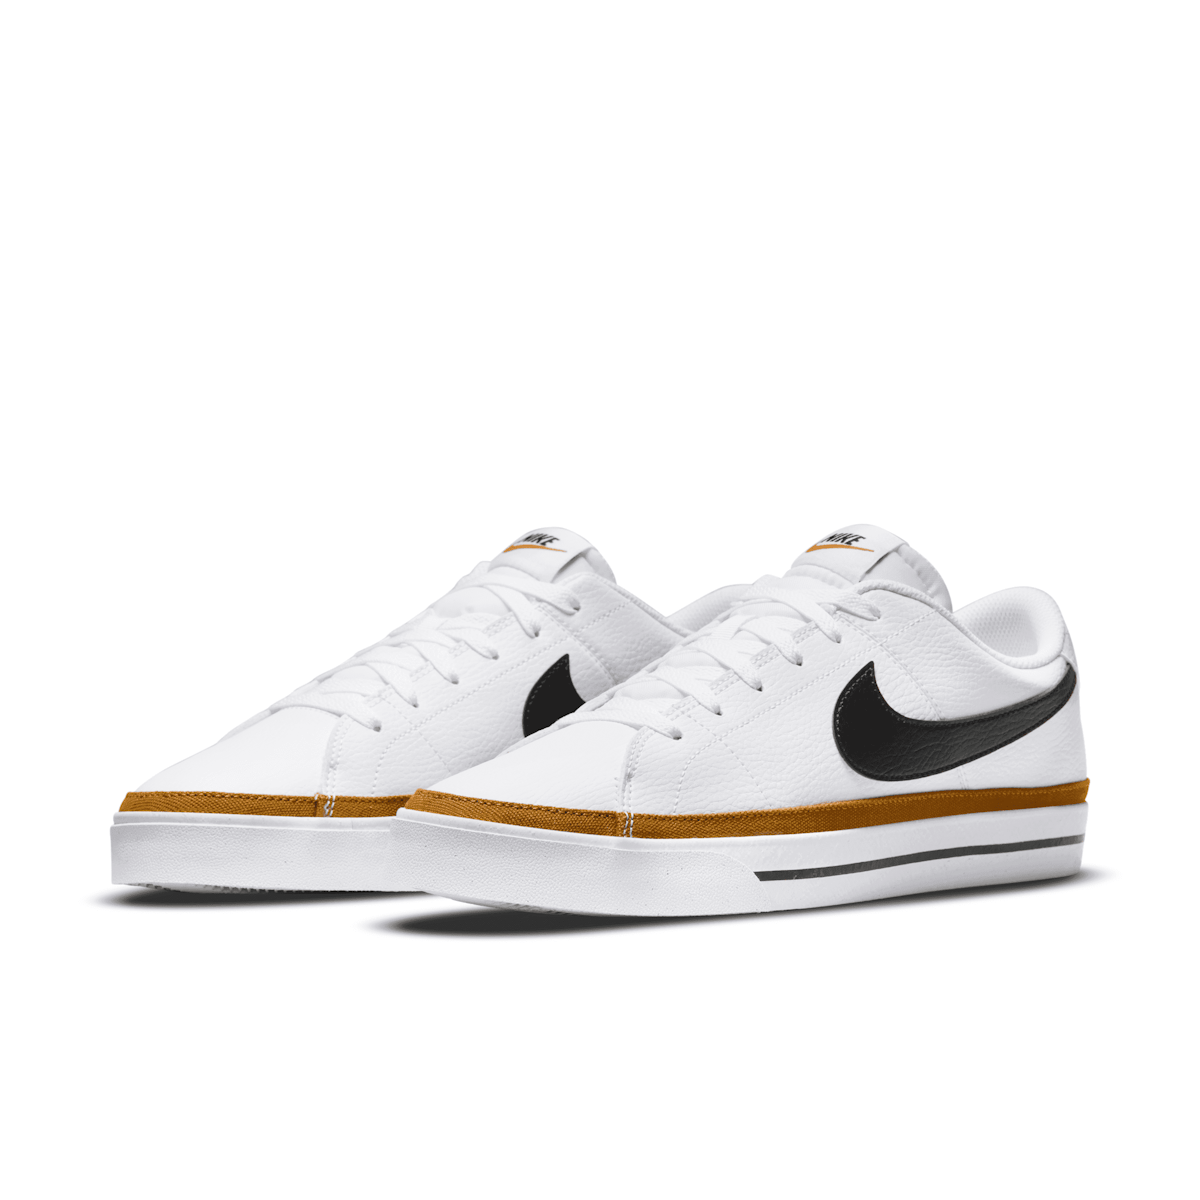 Nike Court Legacy Shoes in White - DH3162-100 Raffles and Release Date